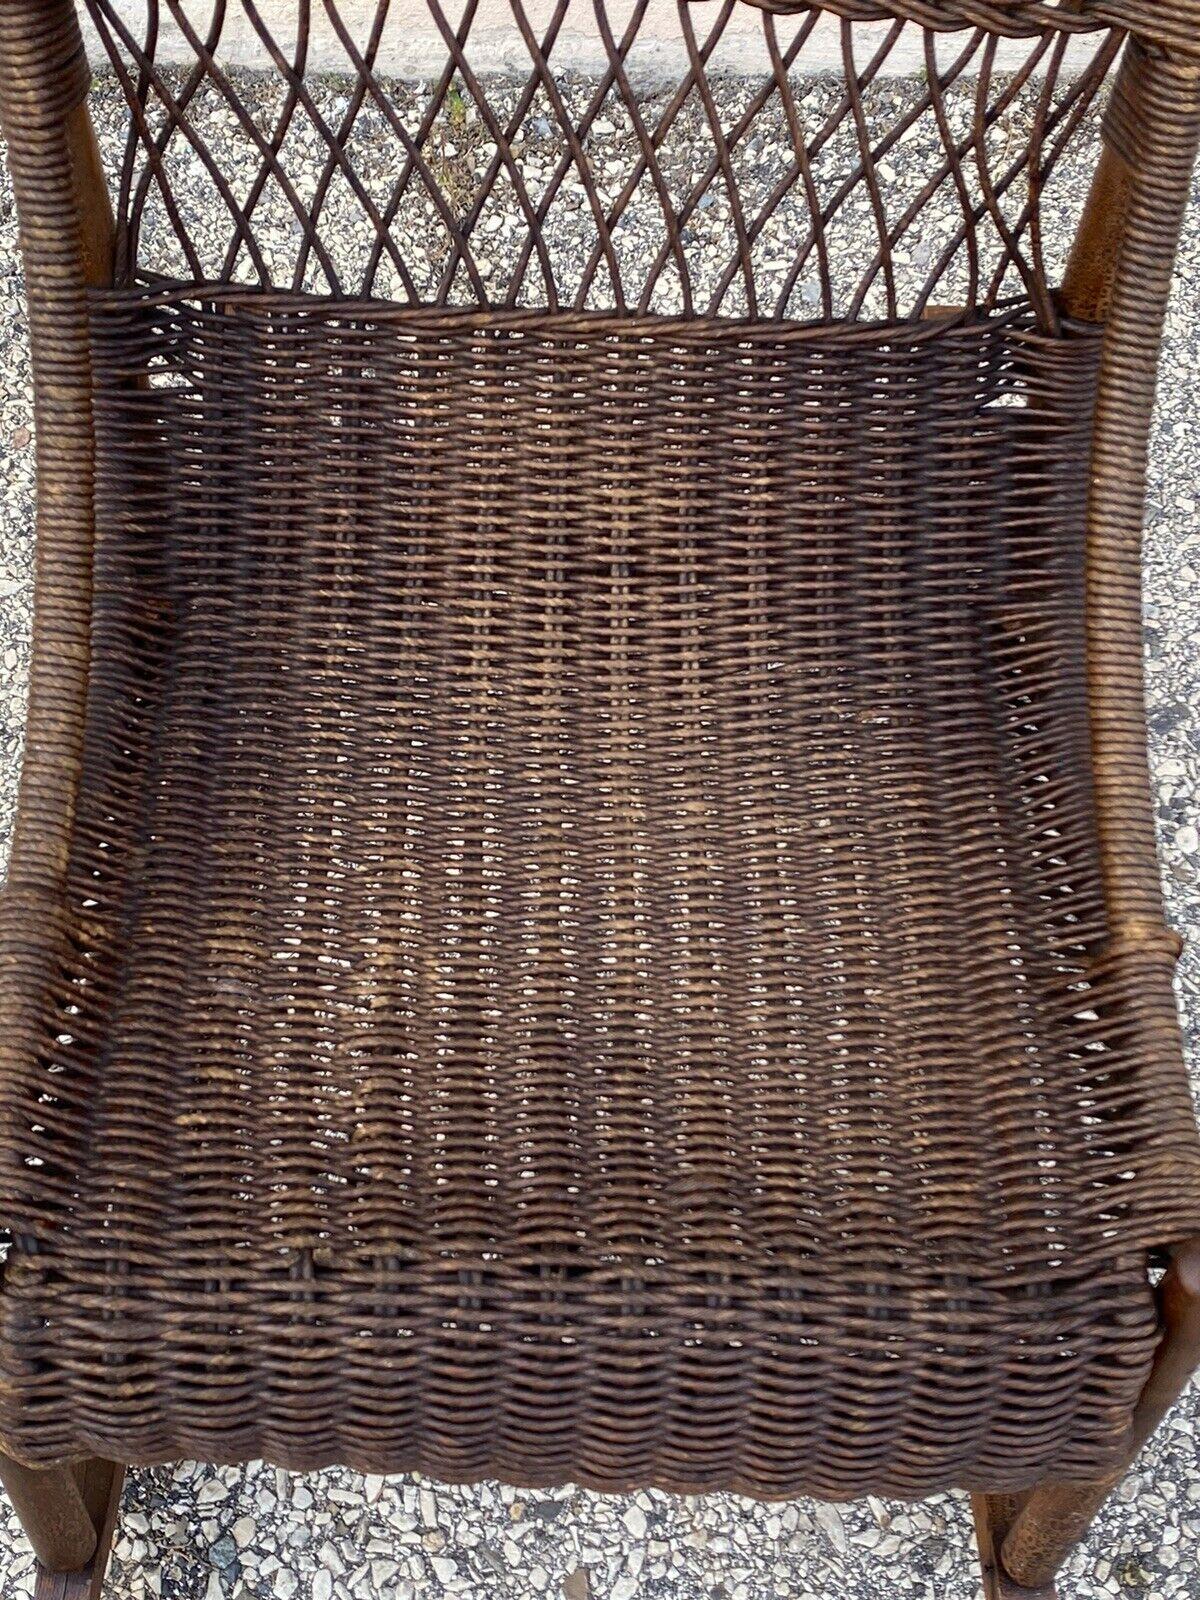 19th Century Antique Wicker and Rattan Wooden Victorian Rocking Chair Rocker For Sale